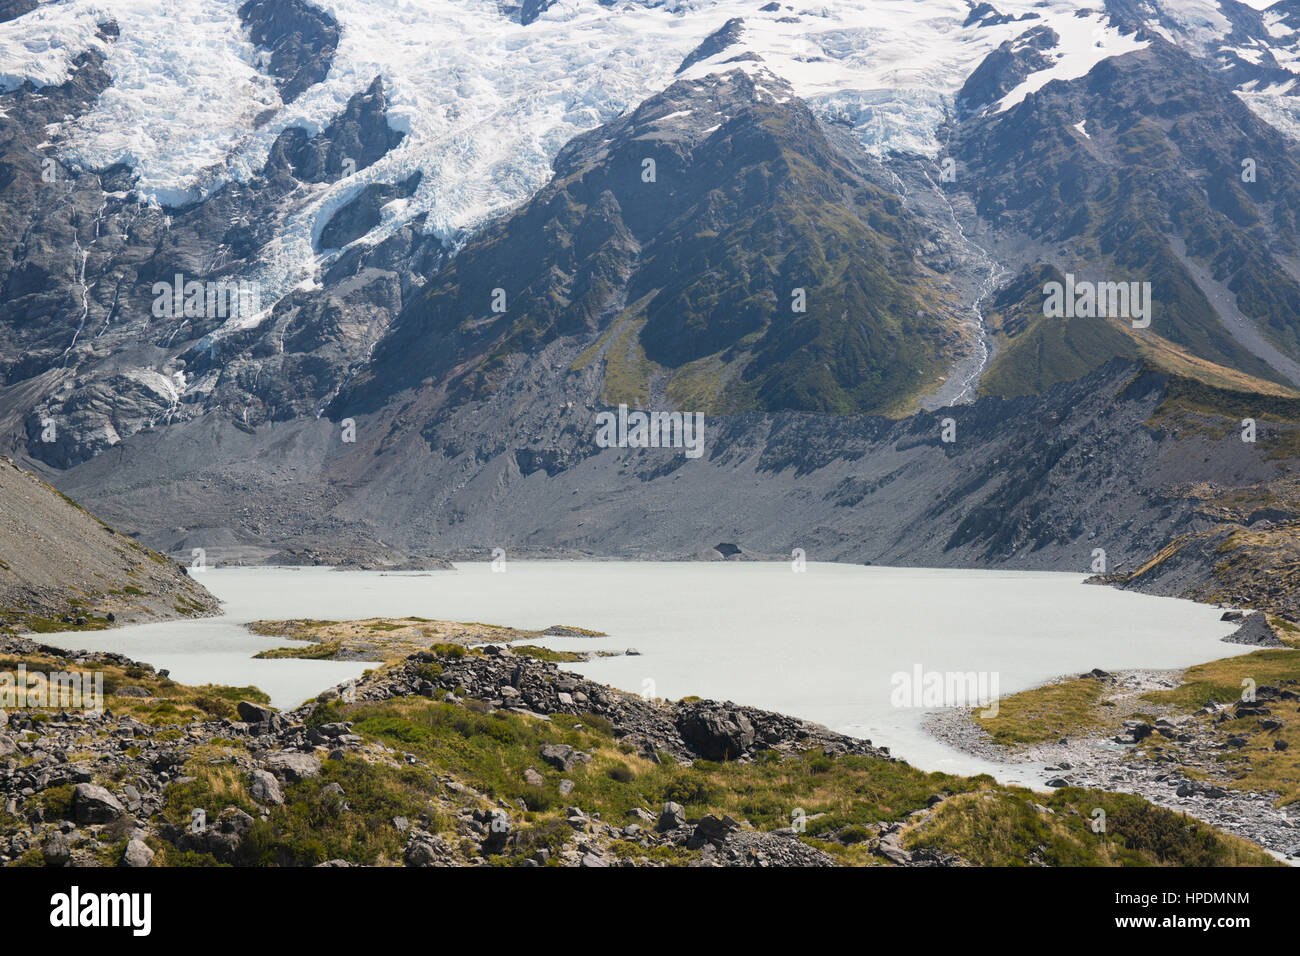 Aoraki/Mount Cook National Park, Canterbury, New Zealand. View across Mueller Lake to the snow-covered slopes of Mount Sefton. Stock Photo